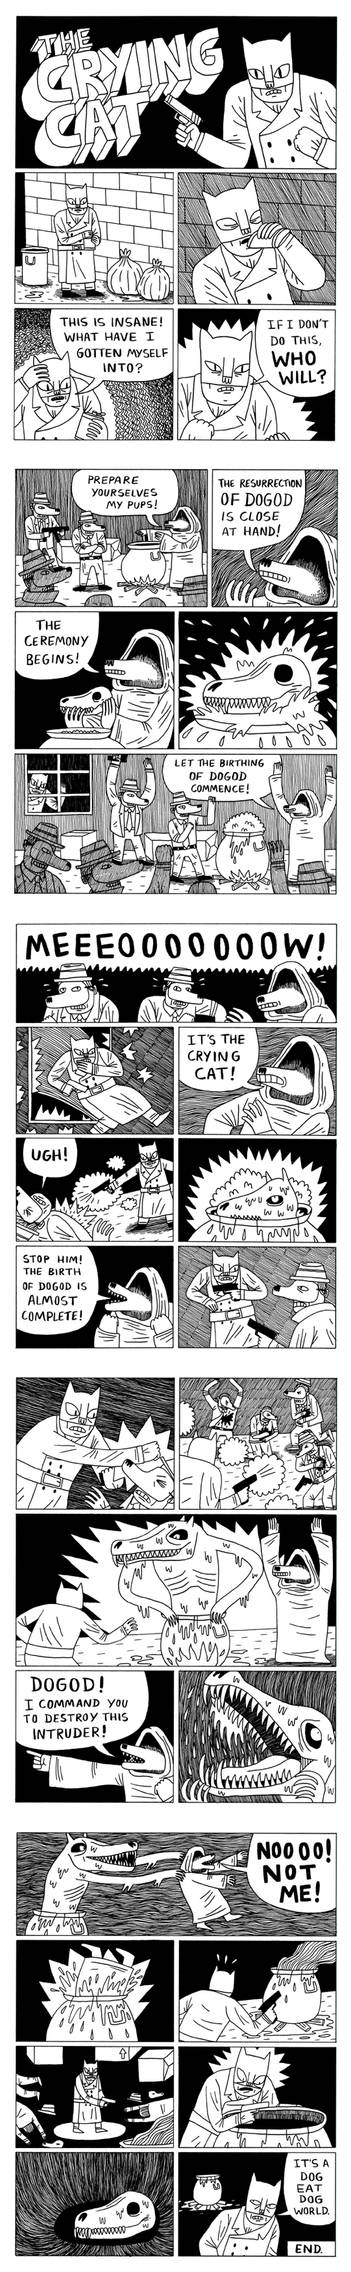 The Crying Cat comic